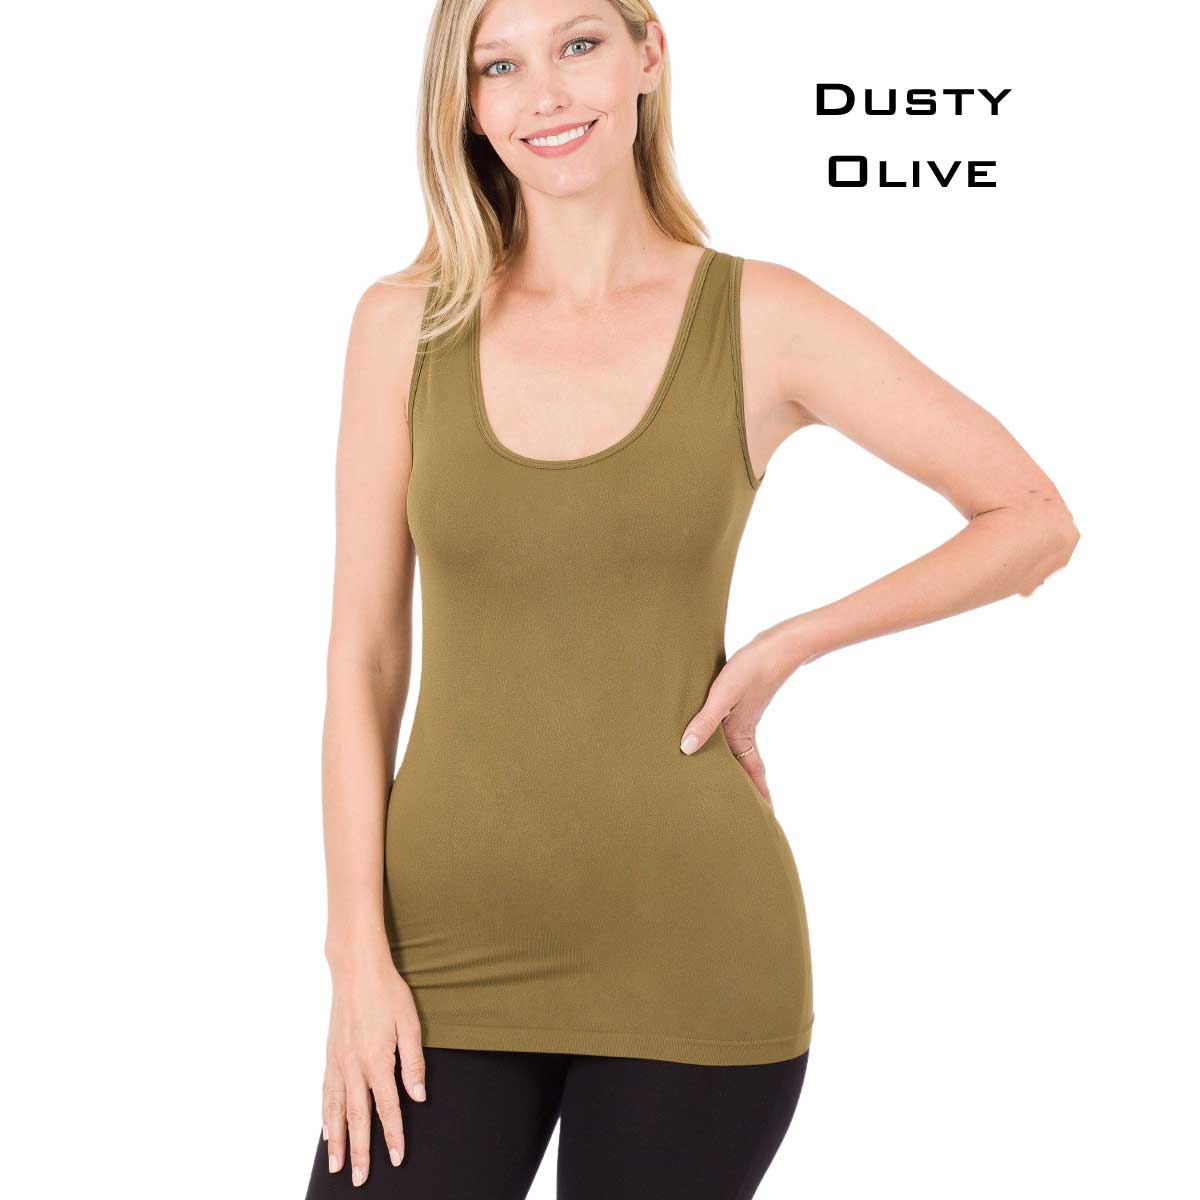 DUSTY OLIVE Scoop Neck Seamless Tank Top 6700 MB